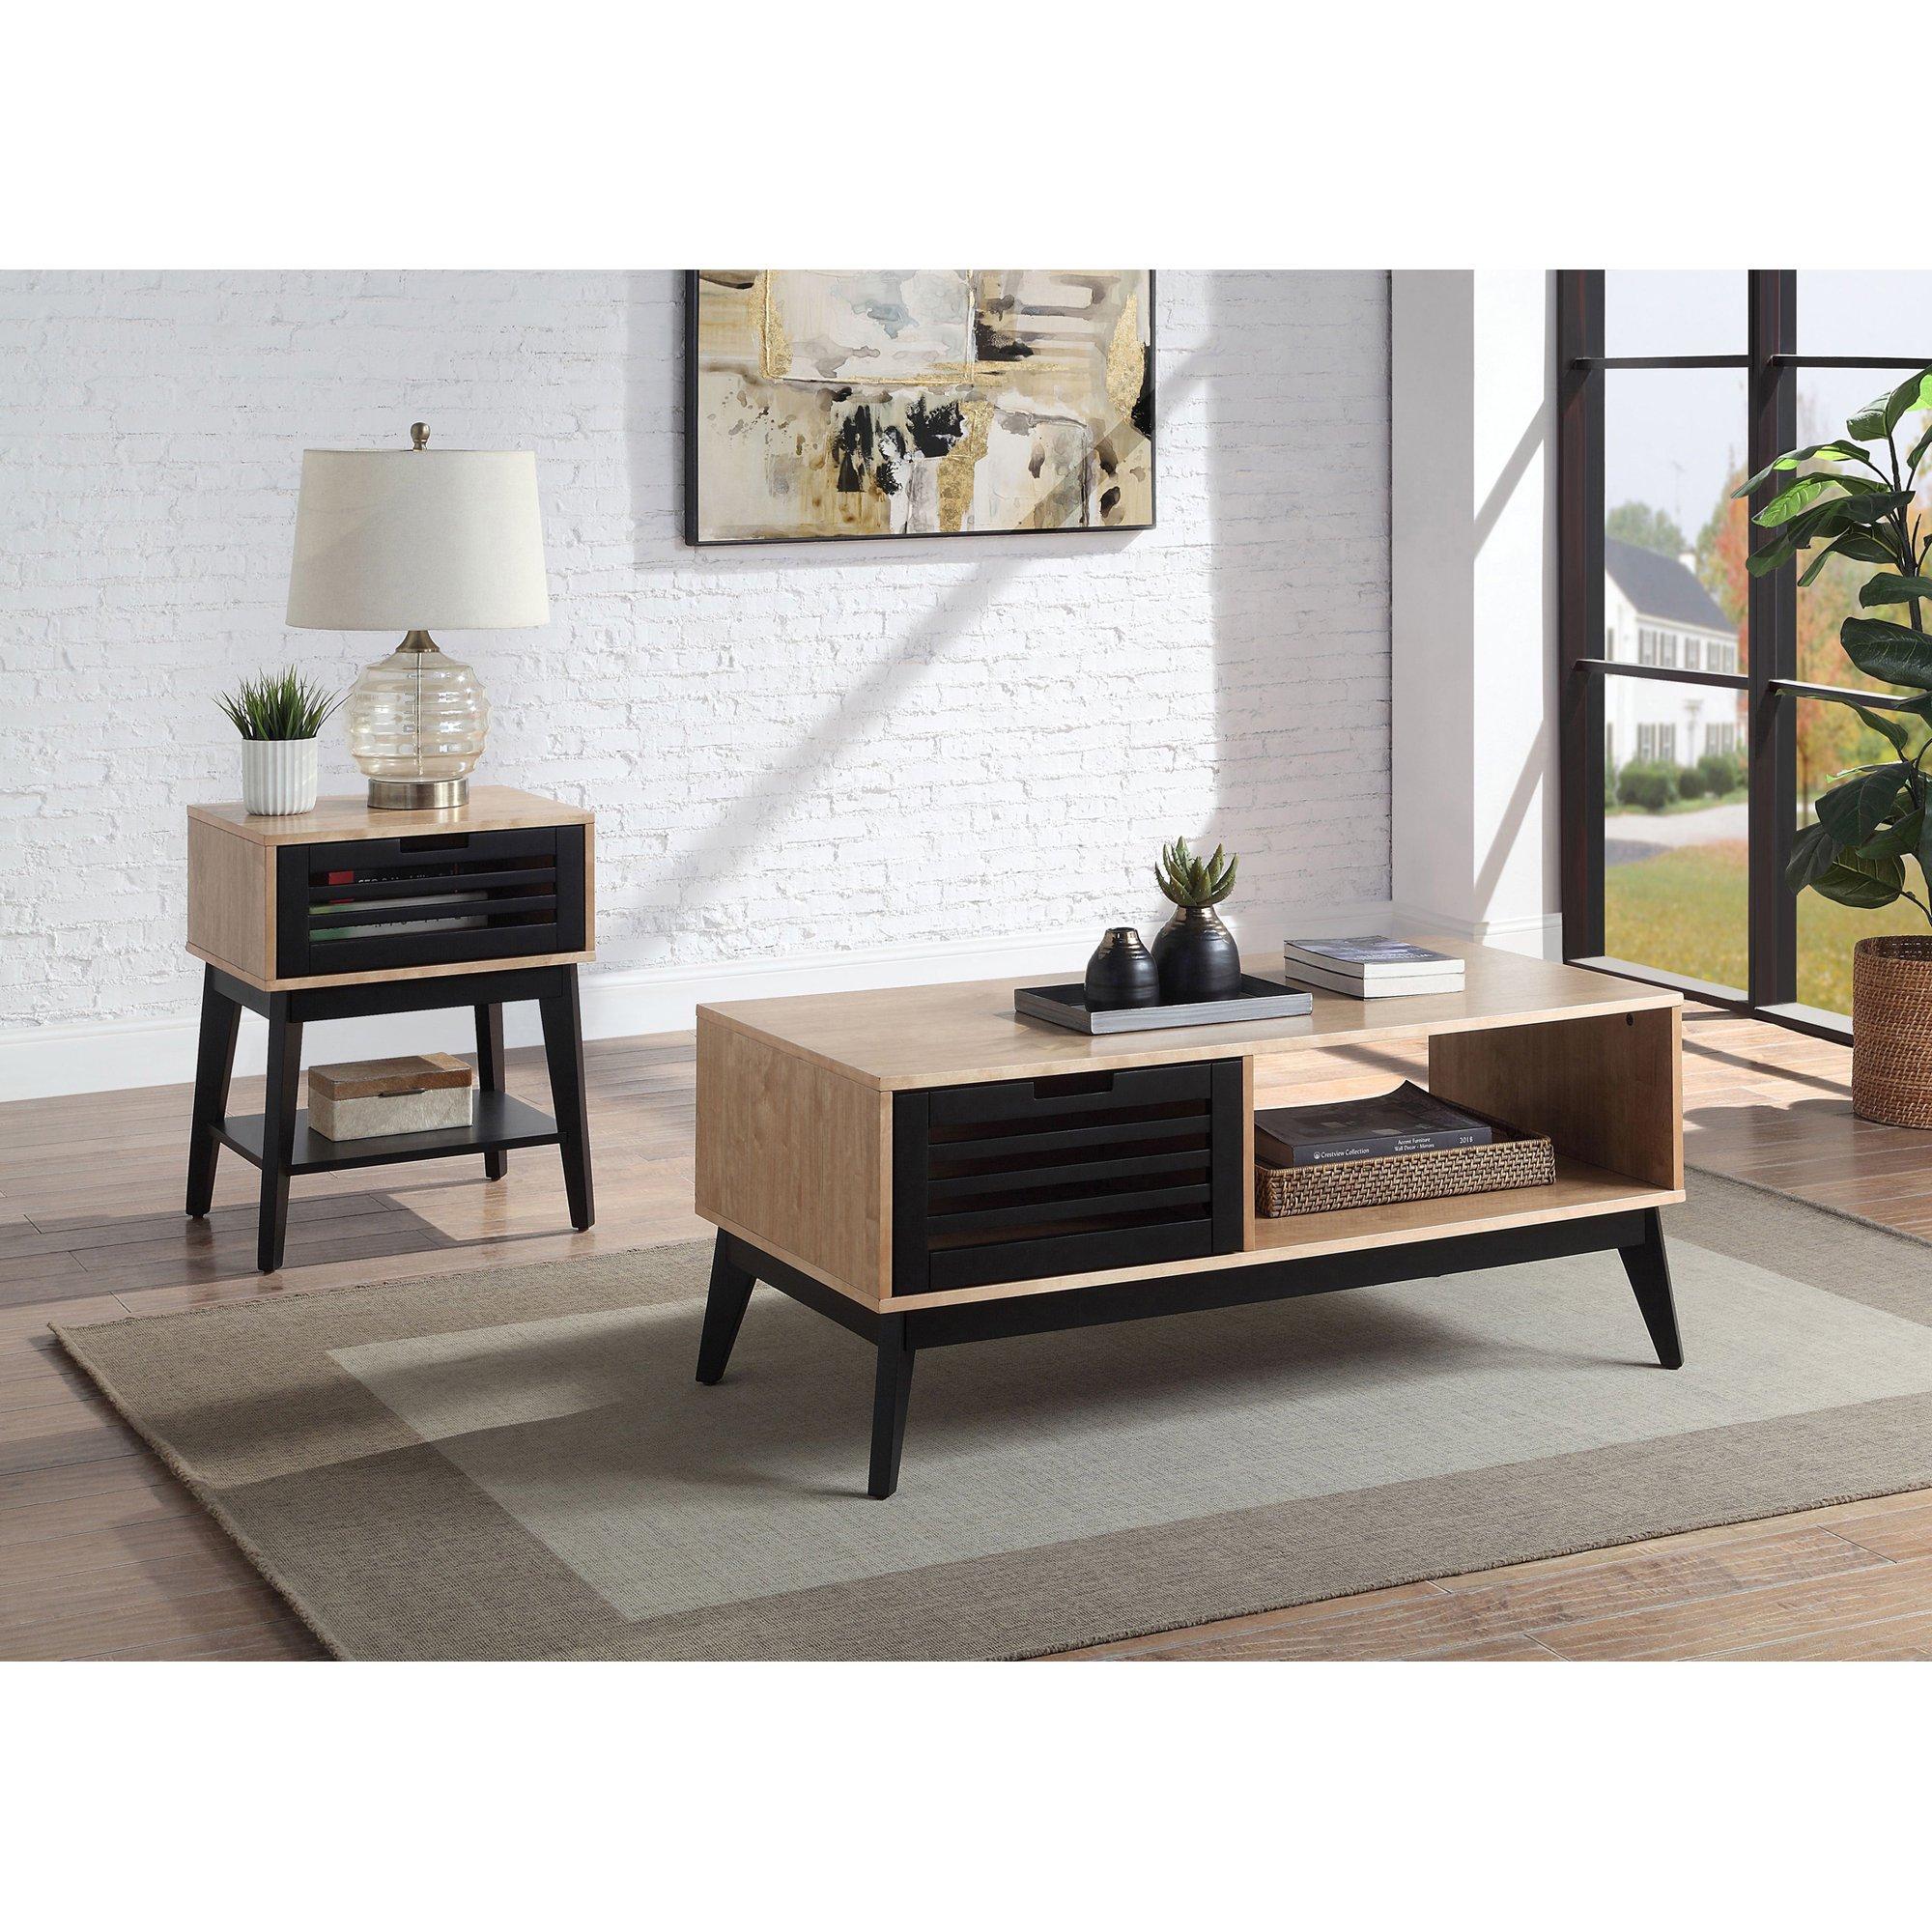 Contemporary Coffee Table and 2 End Tables Gamaliel LV00859-3pcs in Natural 